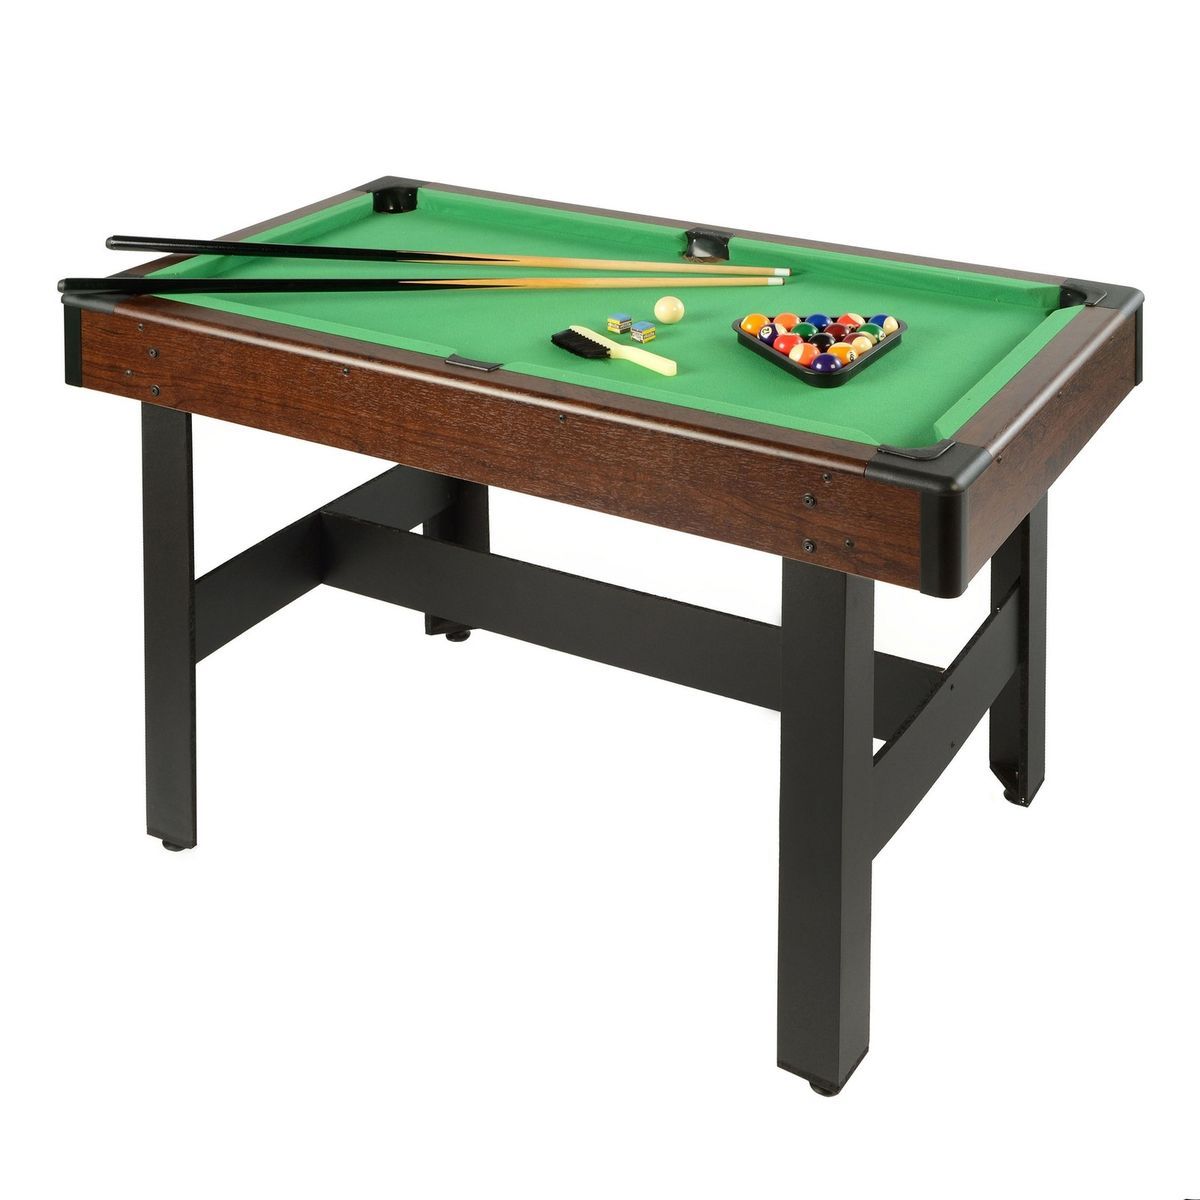 Voit 48 Pool Table Billiards with Accessories Game Kids Arcade Fun